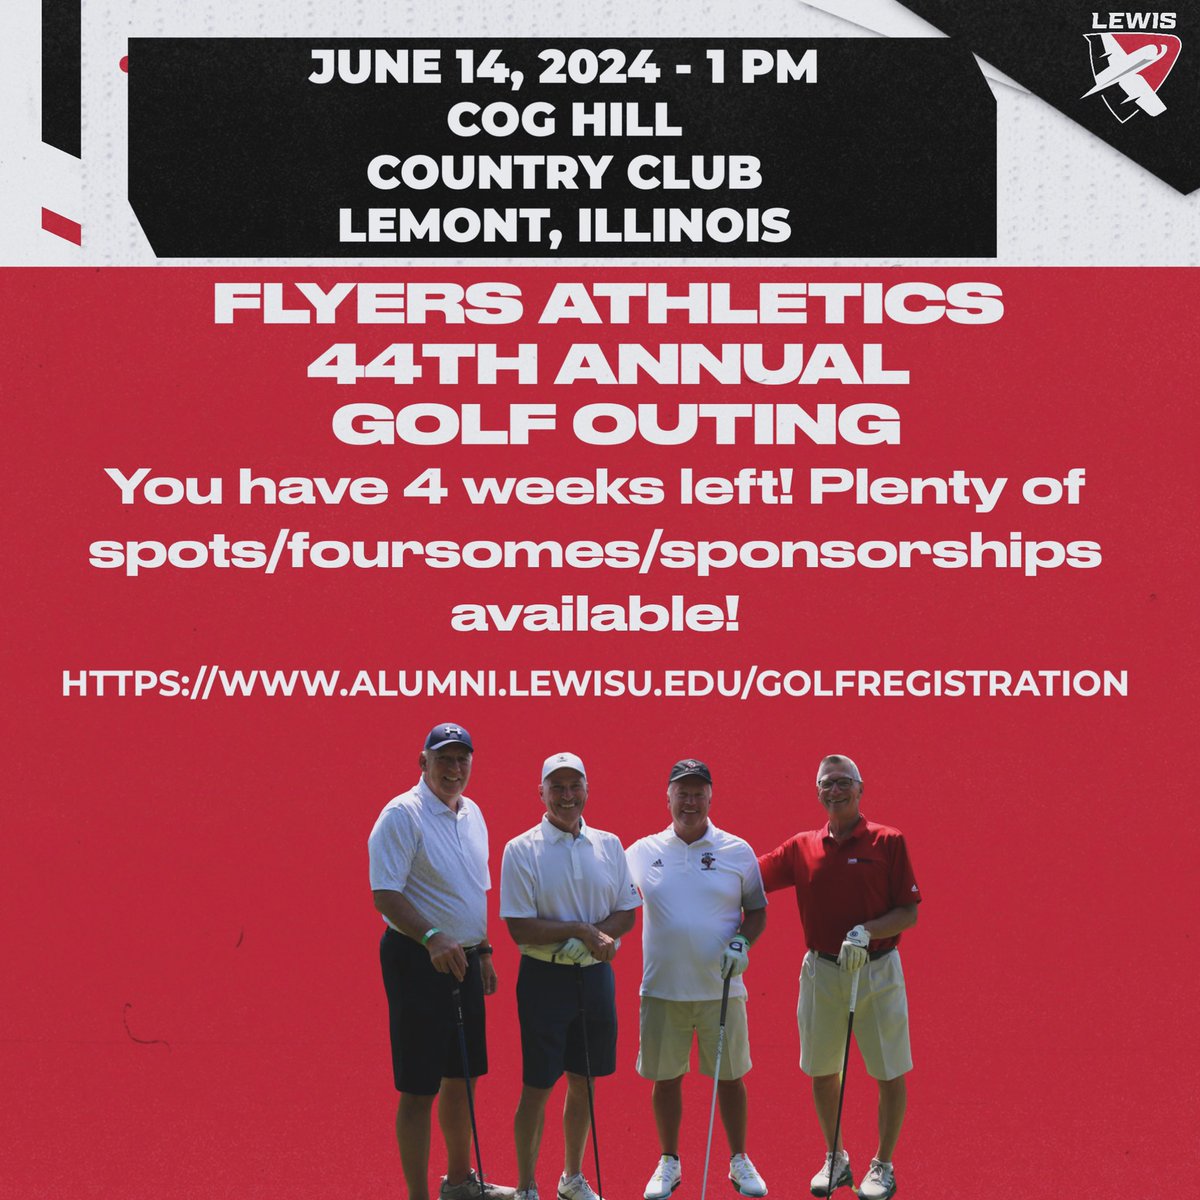 We are only four weeks away from the 44th annual @LewisFlyers Golf Outing at Cog Hill Country Club (@CogHillGolf) ! There are plenty of spots, foursomes, sponsorships available for our golf outing on June 14! Sign up today! alumni.lewisu.edu/GolfRegistrati…